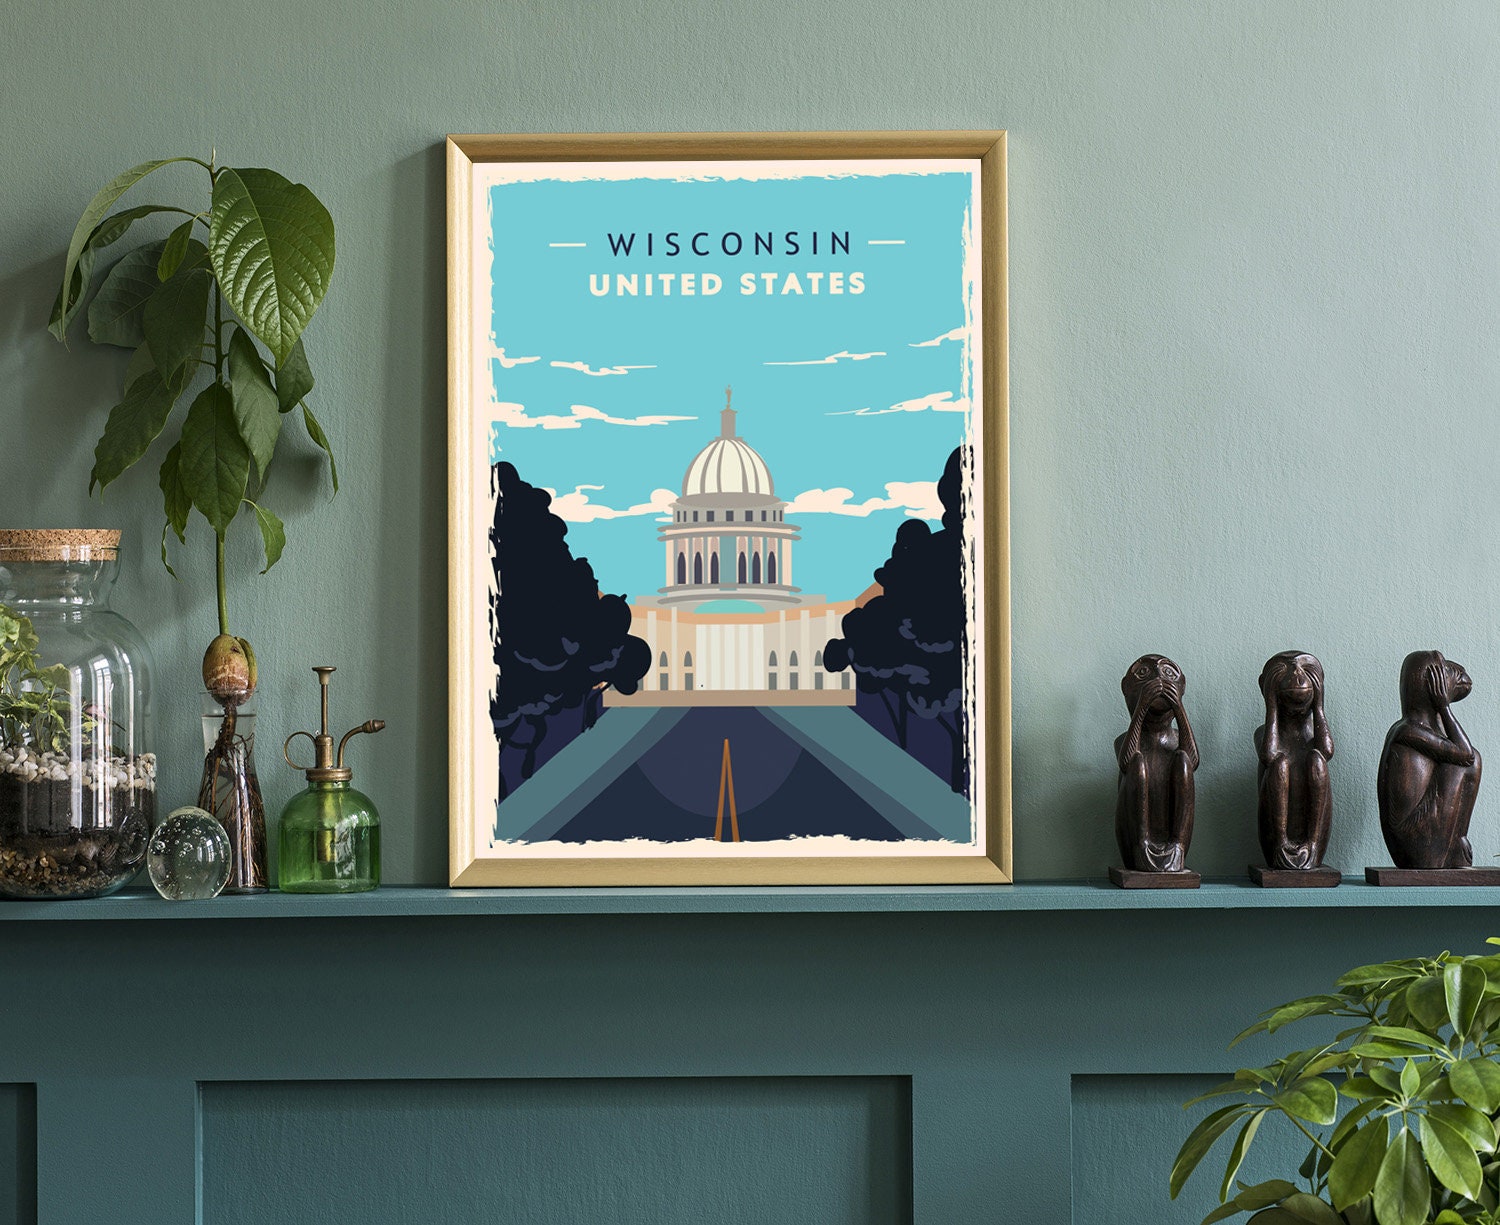 Wisconsin Vintage Rustic Poster Print, Retro Style Travel Poster